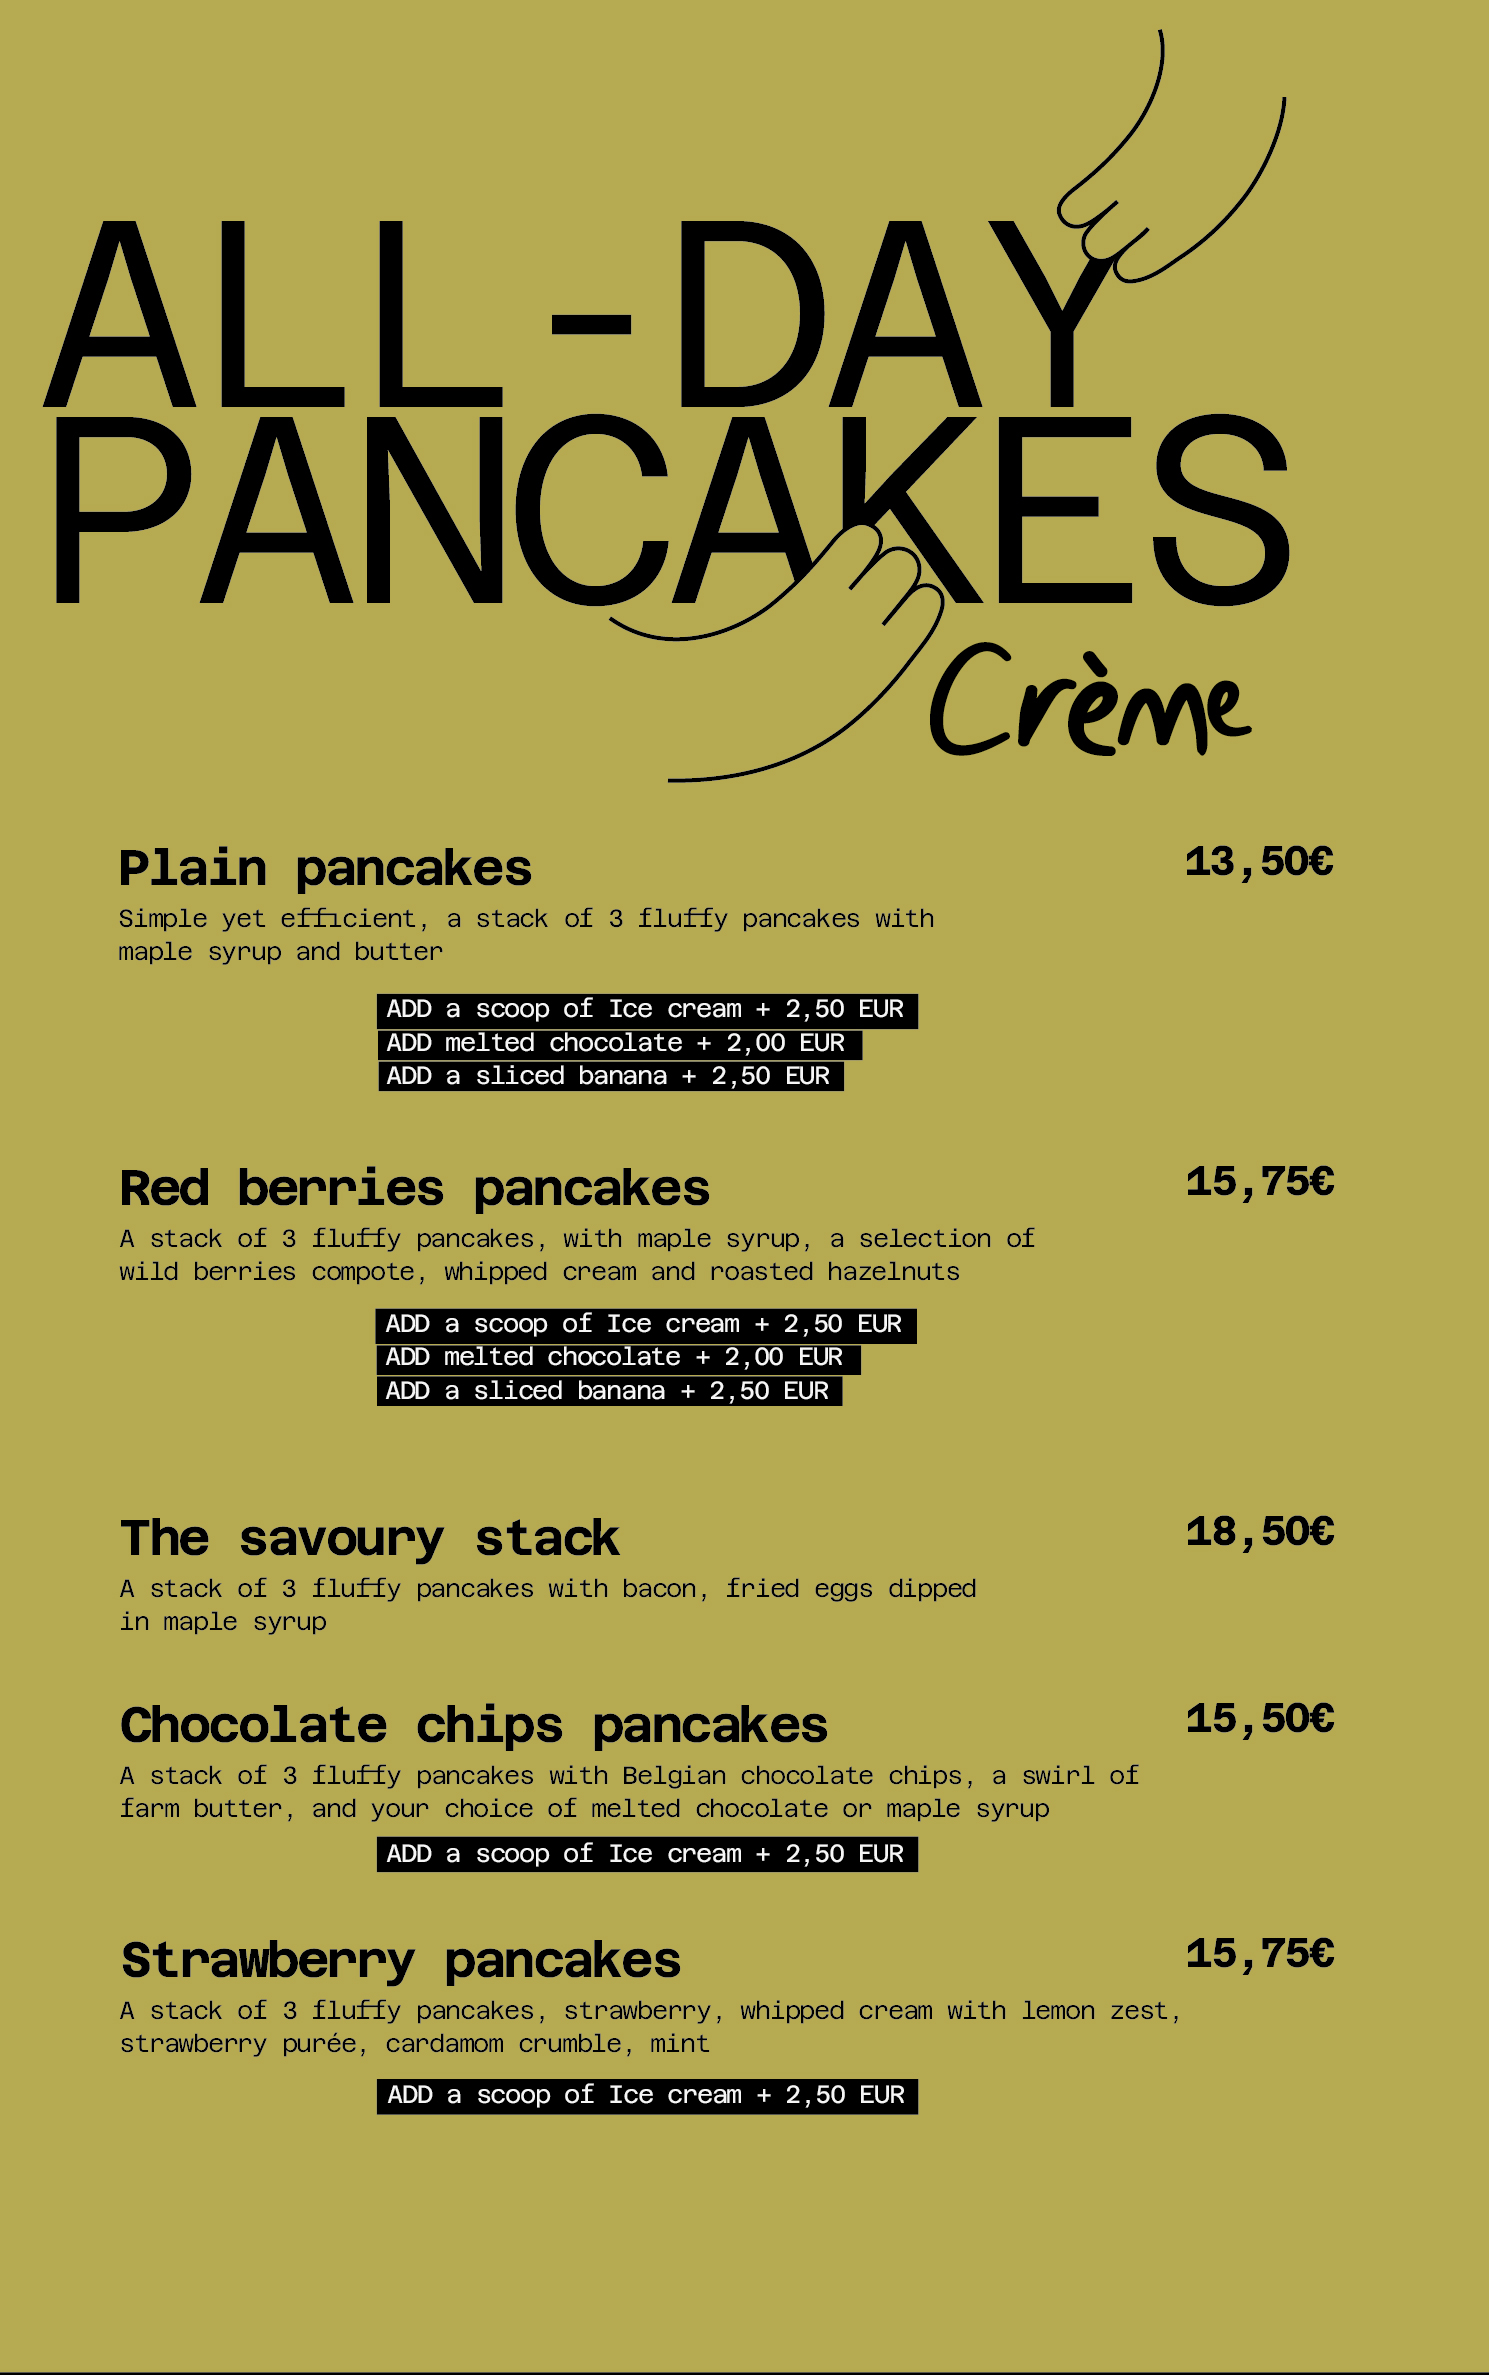 creme brussels all day eatery and coffee. best brunch dealer speciality coffee all day pancakes